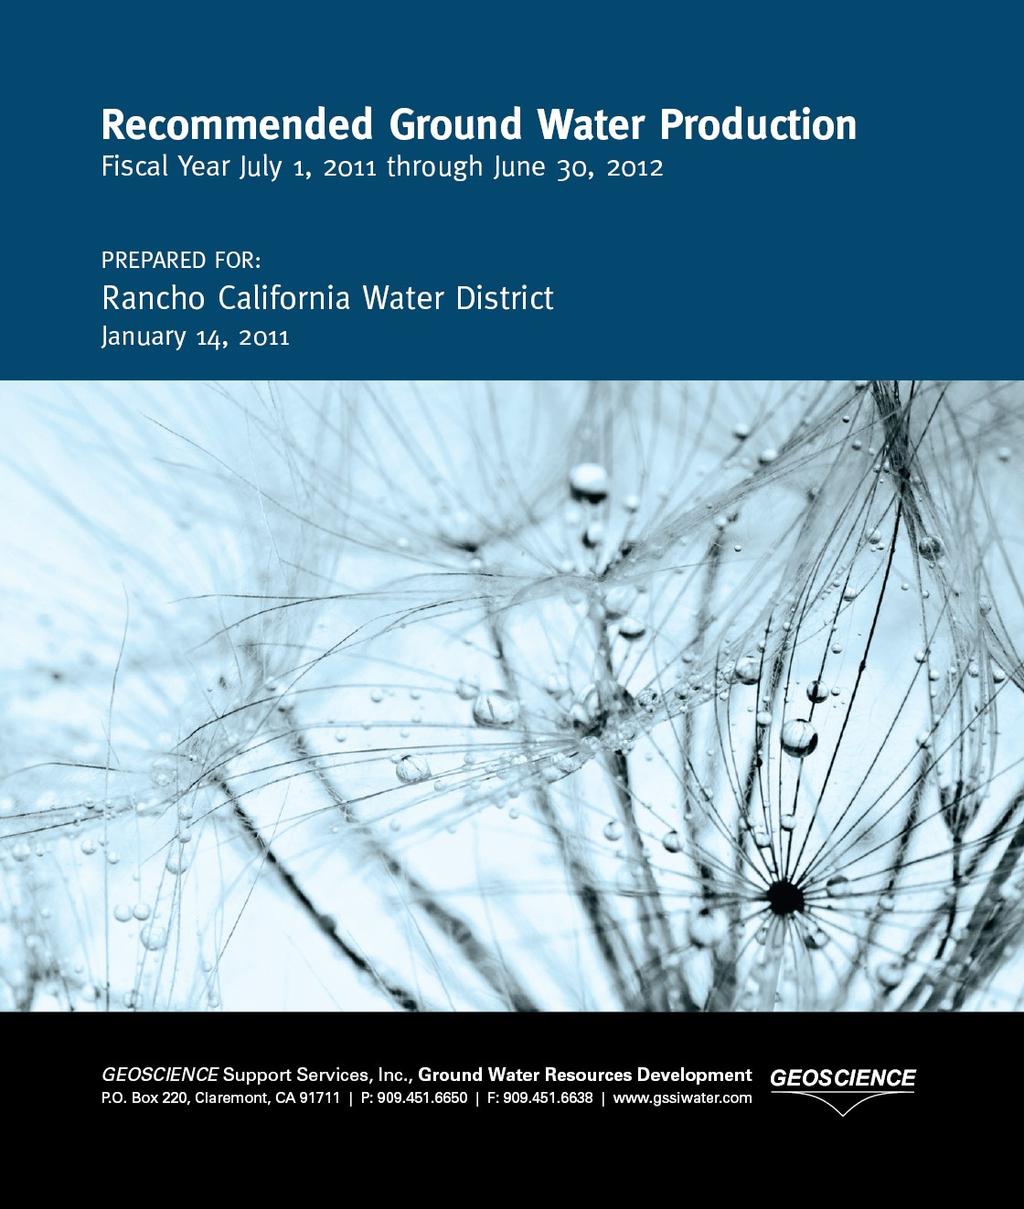 PREPARED FOR: Rancho California Water District January 20, 2016